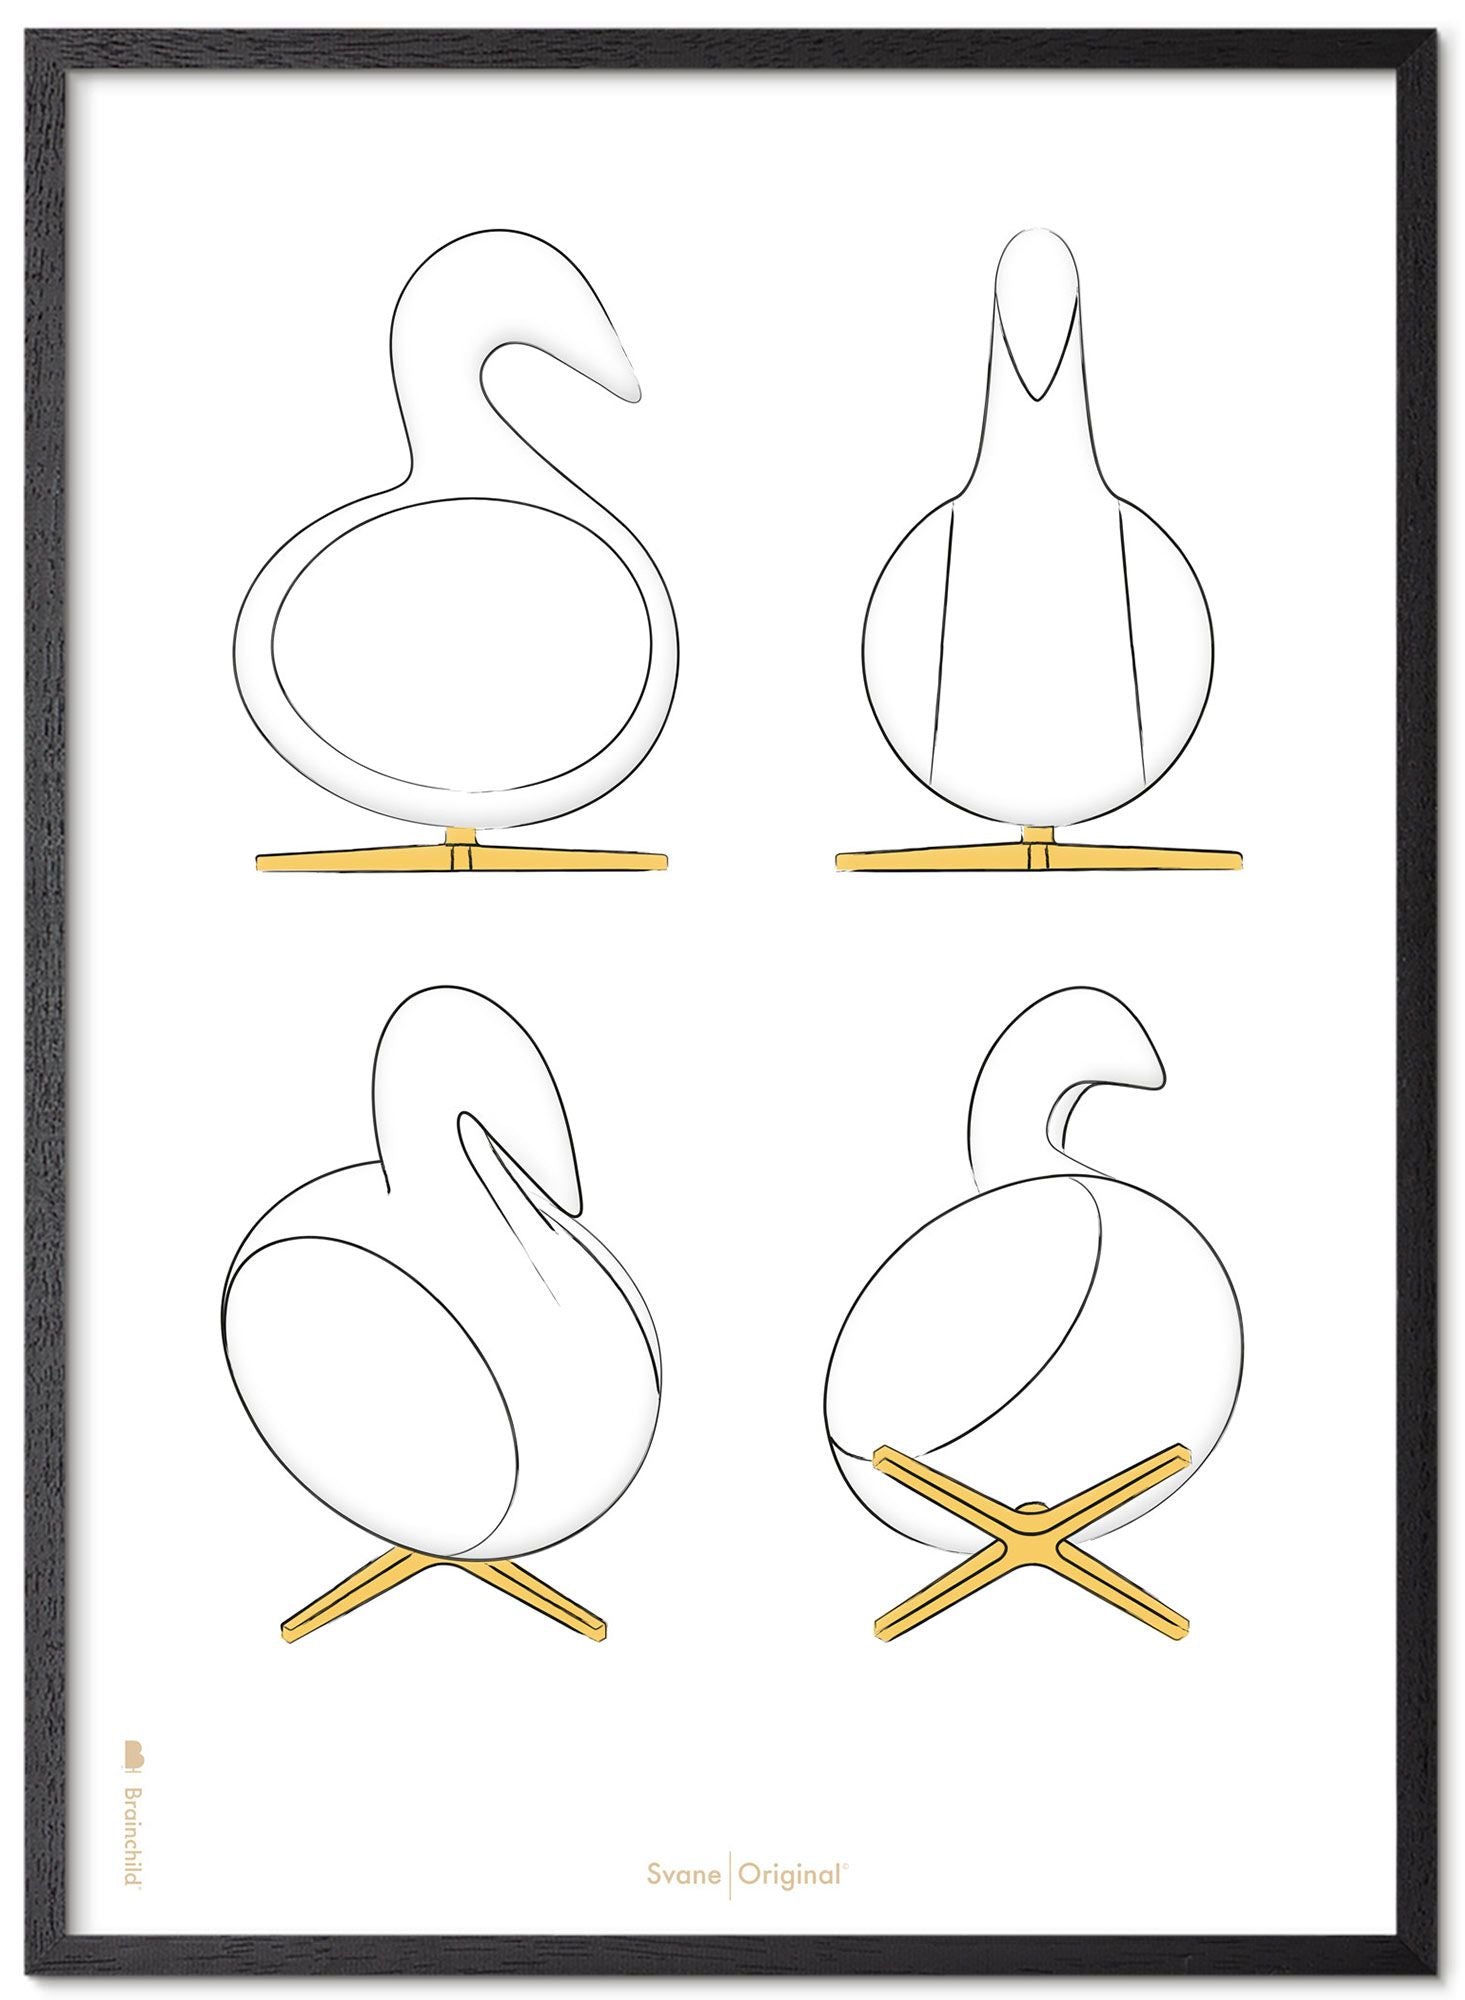 Brainchild Swan Design Sketches Poster Frame Made Of Black Lacquered Wood 50x70 Cm, White Background